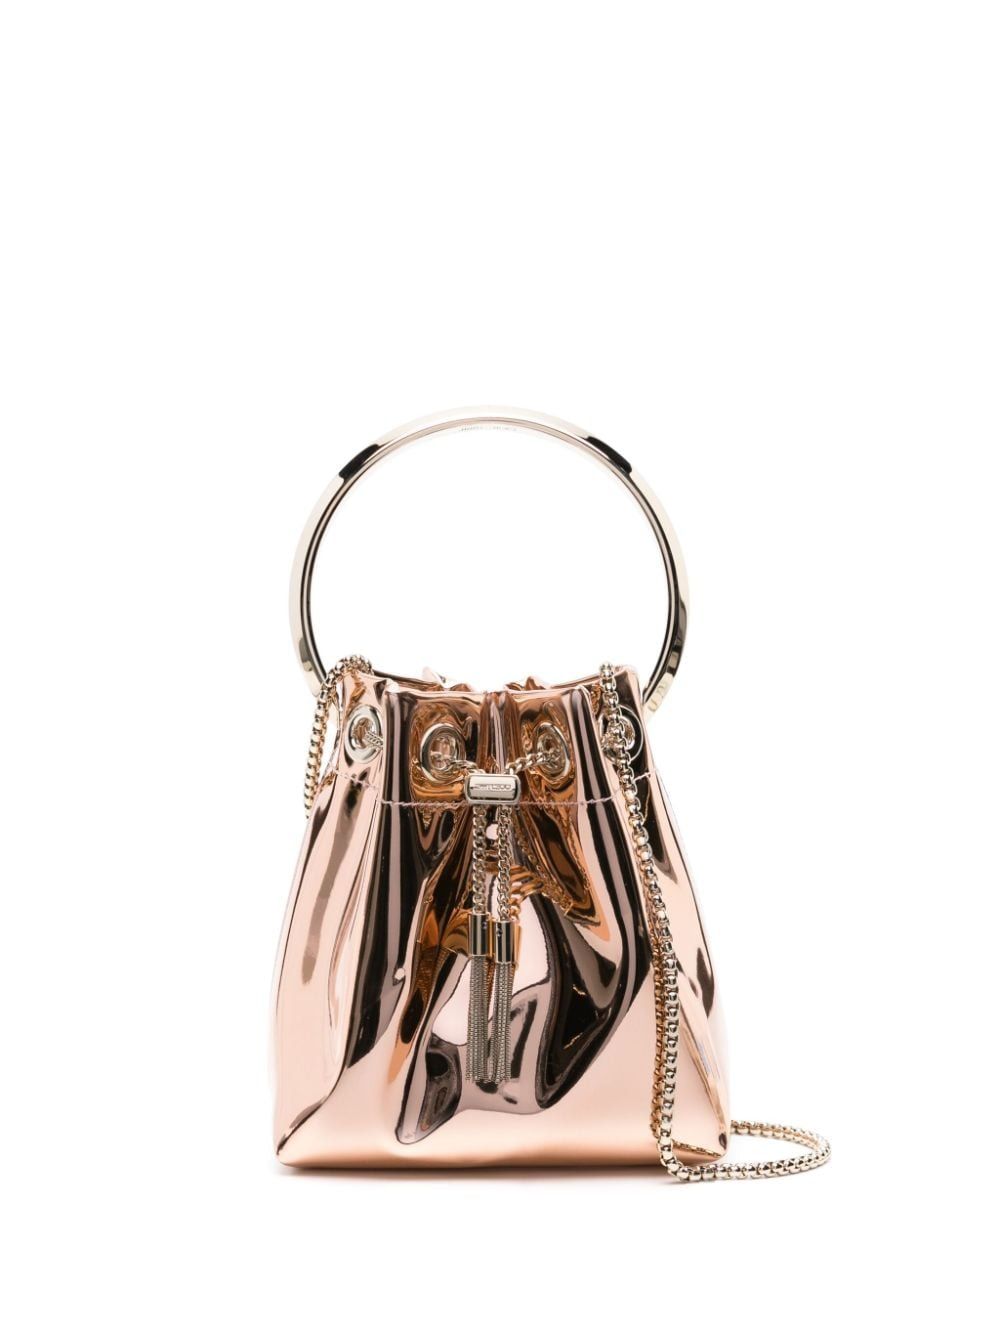 Jimmy Choo Pink Gold Mirror Effect Handbag With Metal Handle And Chain Strap